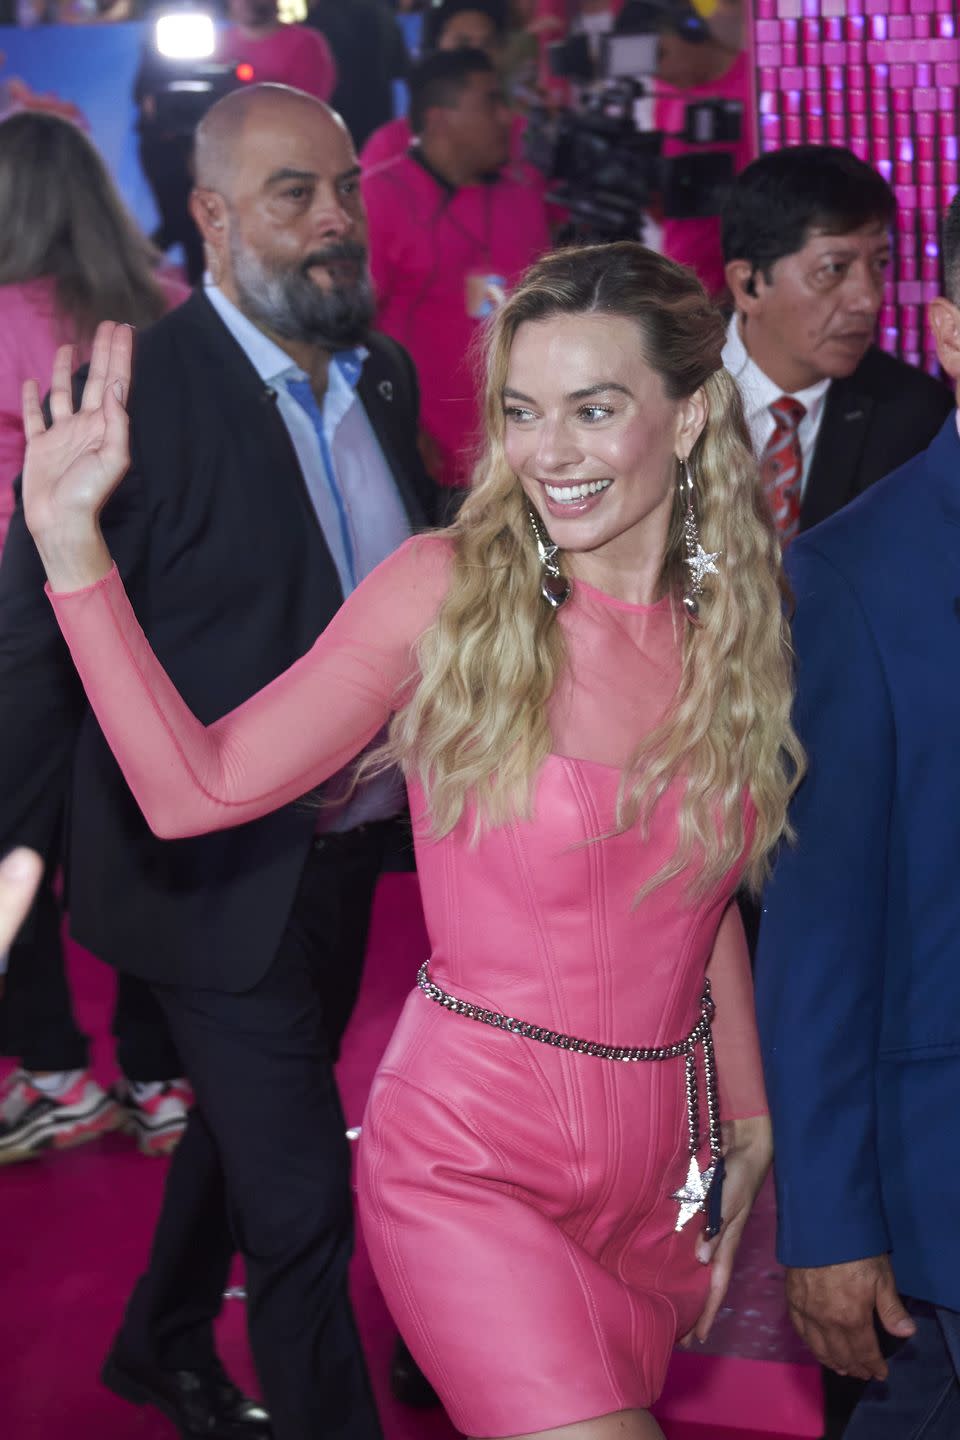 naucalpan de juarez, mexico july 6 margot robbie attends during the pink carpet for barbie movie premiere, at plaza parque toreo on july 6, 2023 in naucalpan de juarez, mexico photo by jaime nogalesmedios y mediagetty images